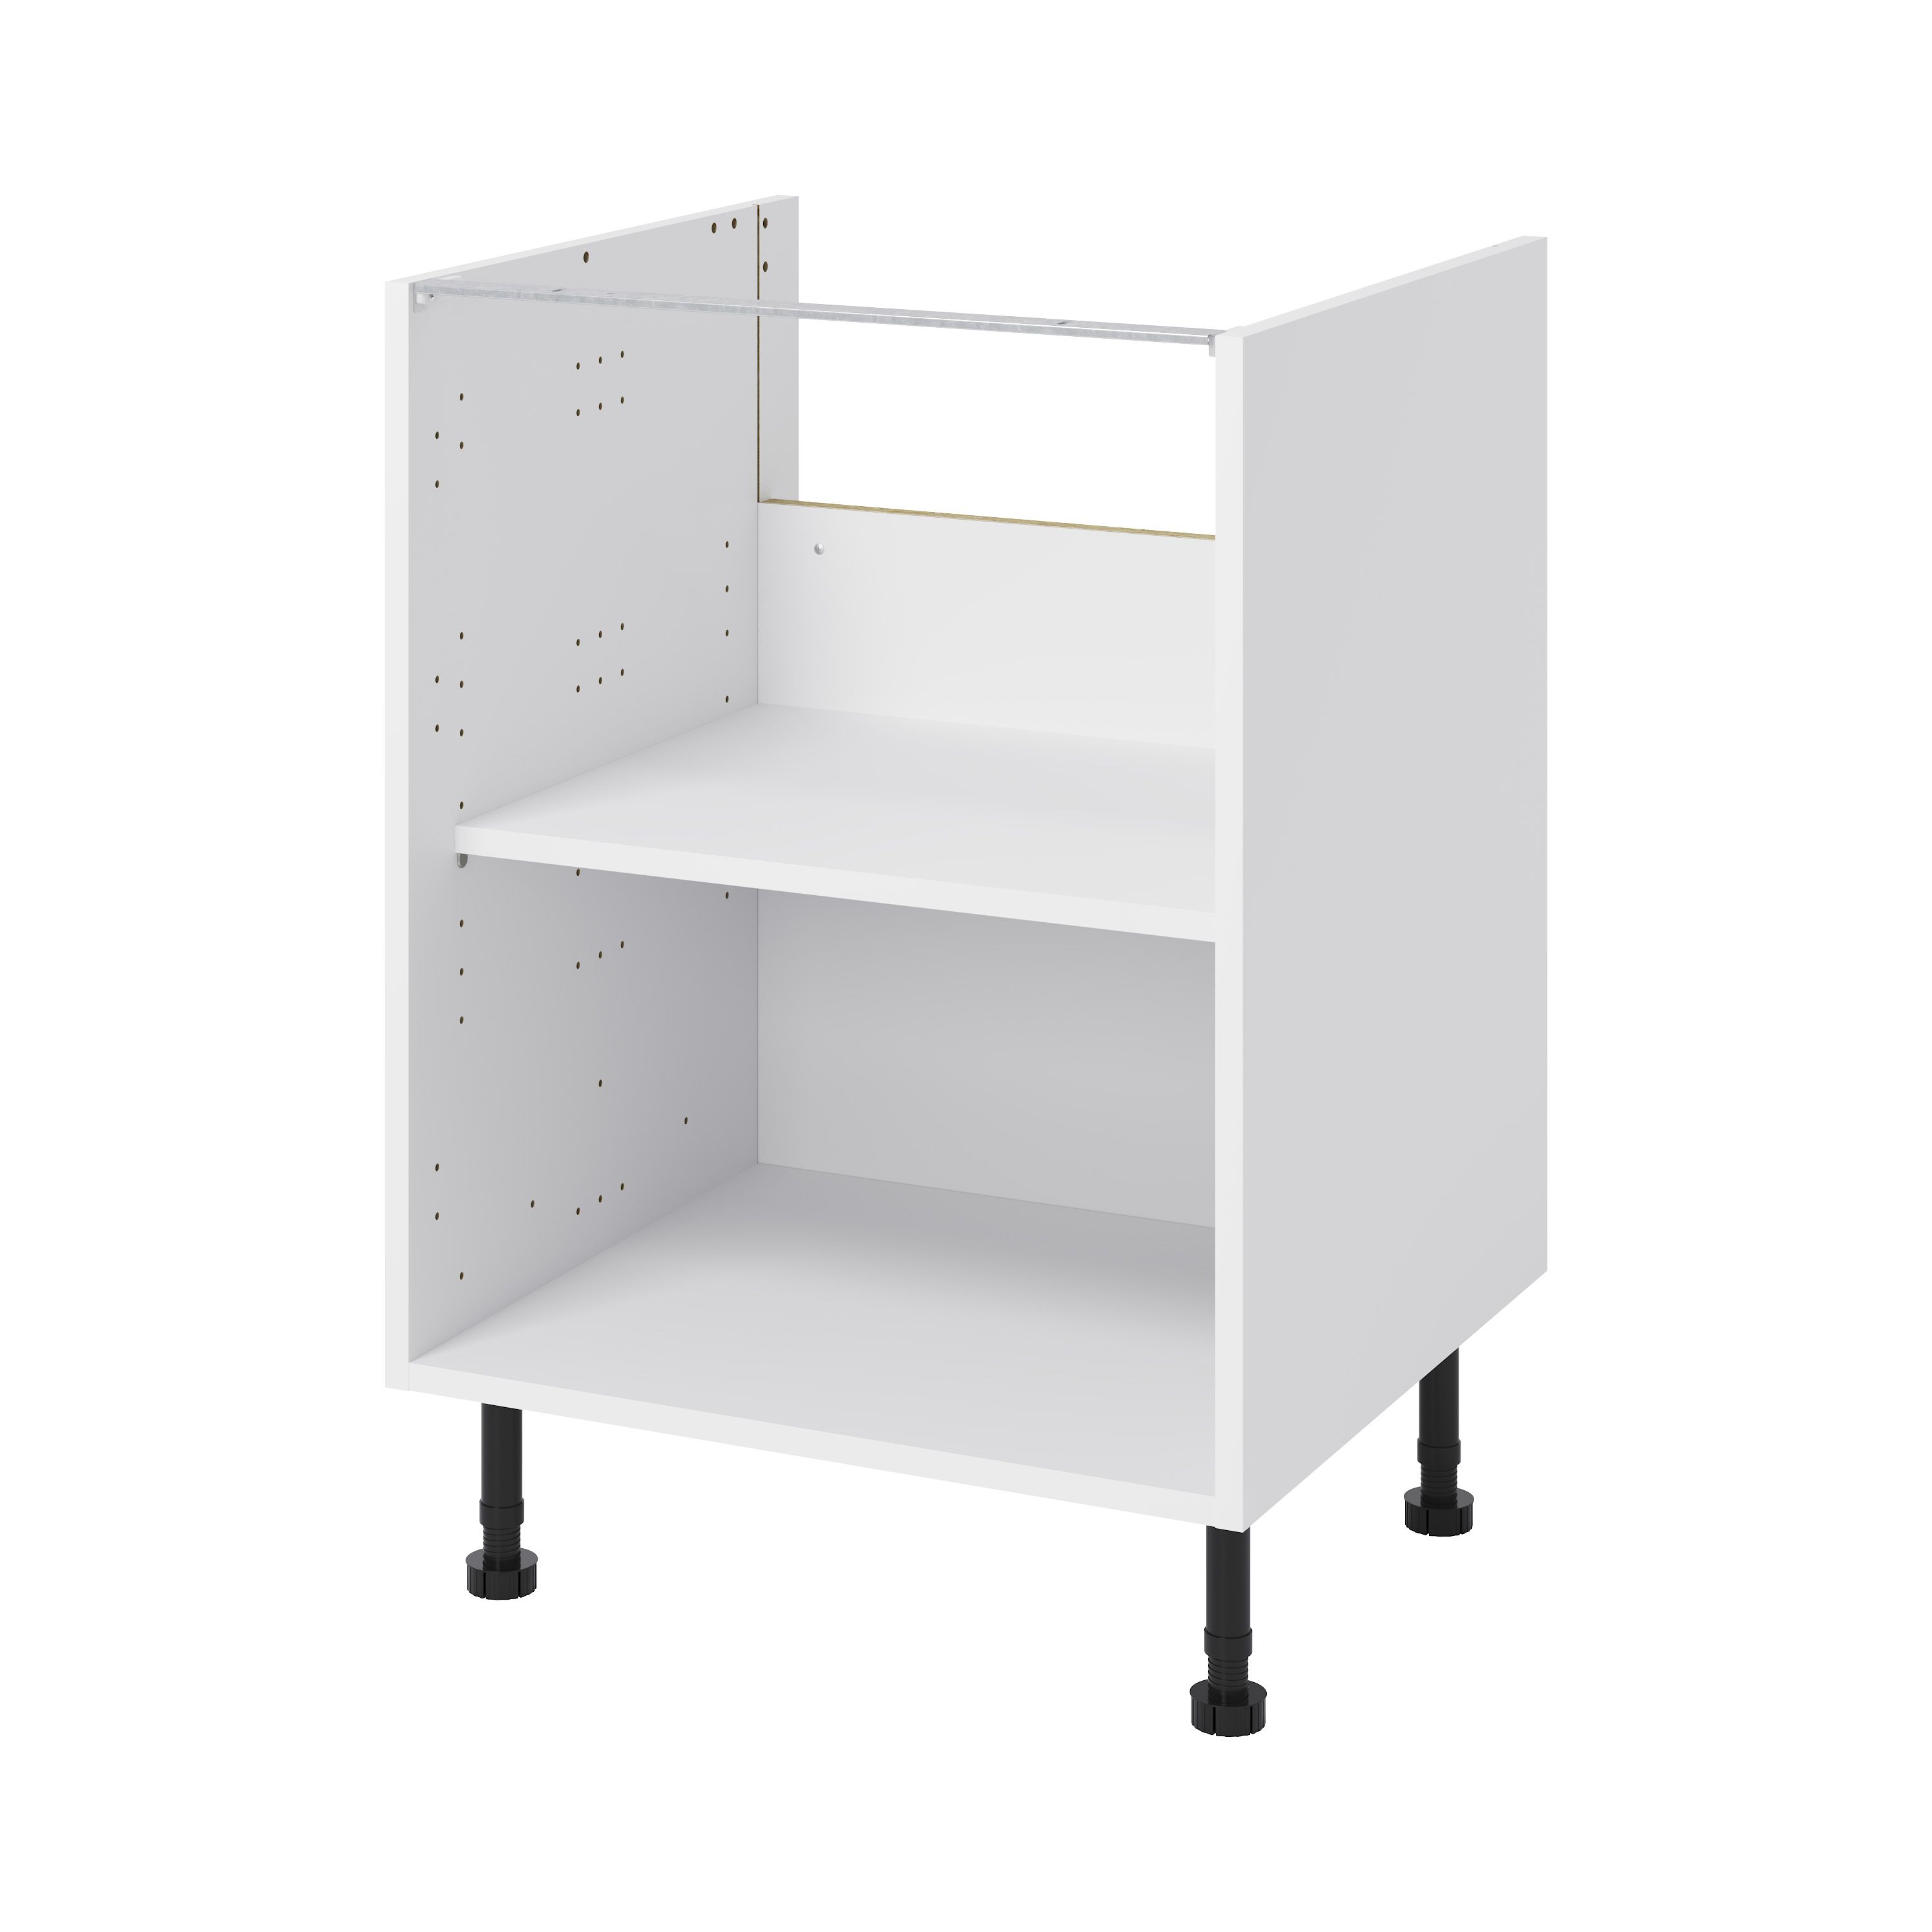 Goodhome Caraway White Base Cabinet W 600mm Diy At B Q